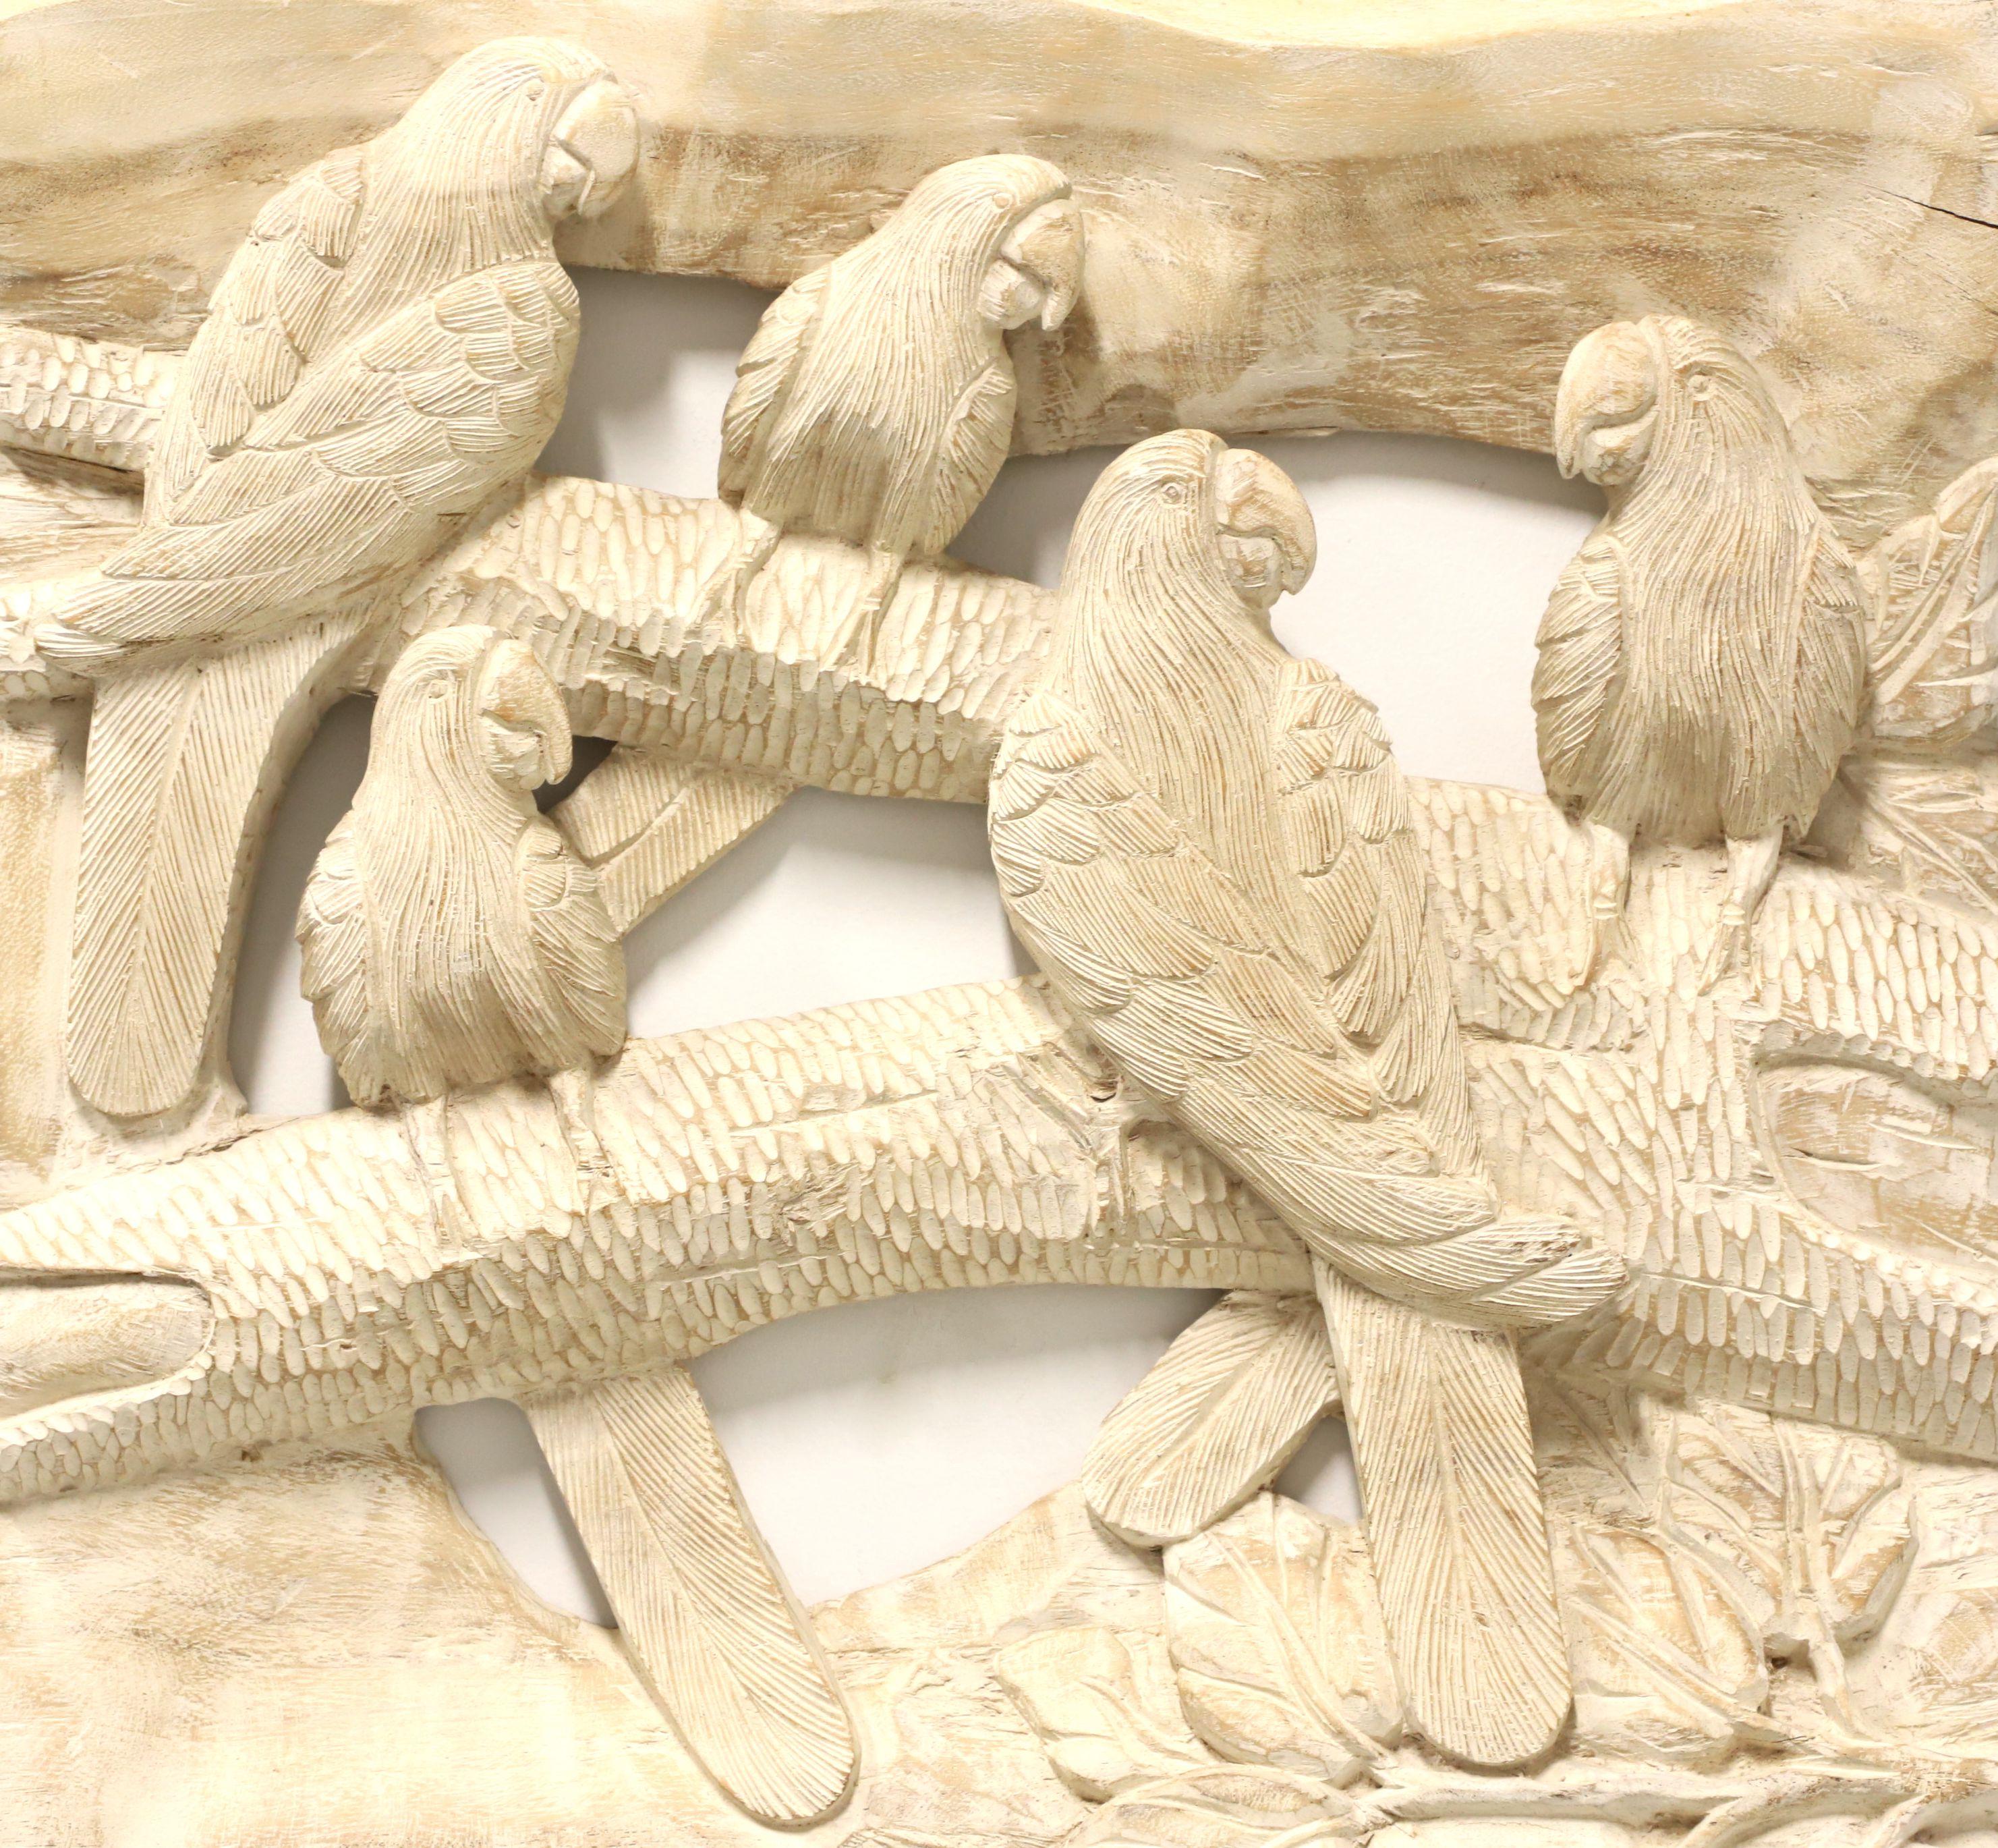 A decorative avian wood carving, from the mid 20th Century. Untitled, (Parrots in a Tree). Unsigned, artist unknown. Carved from one solid piece of wood. Metal hangers attached to back for wall hanging. Origin unknown.

Measures: Overall: 20w 2.5d